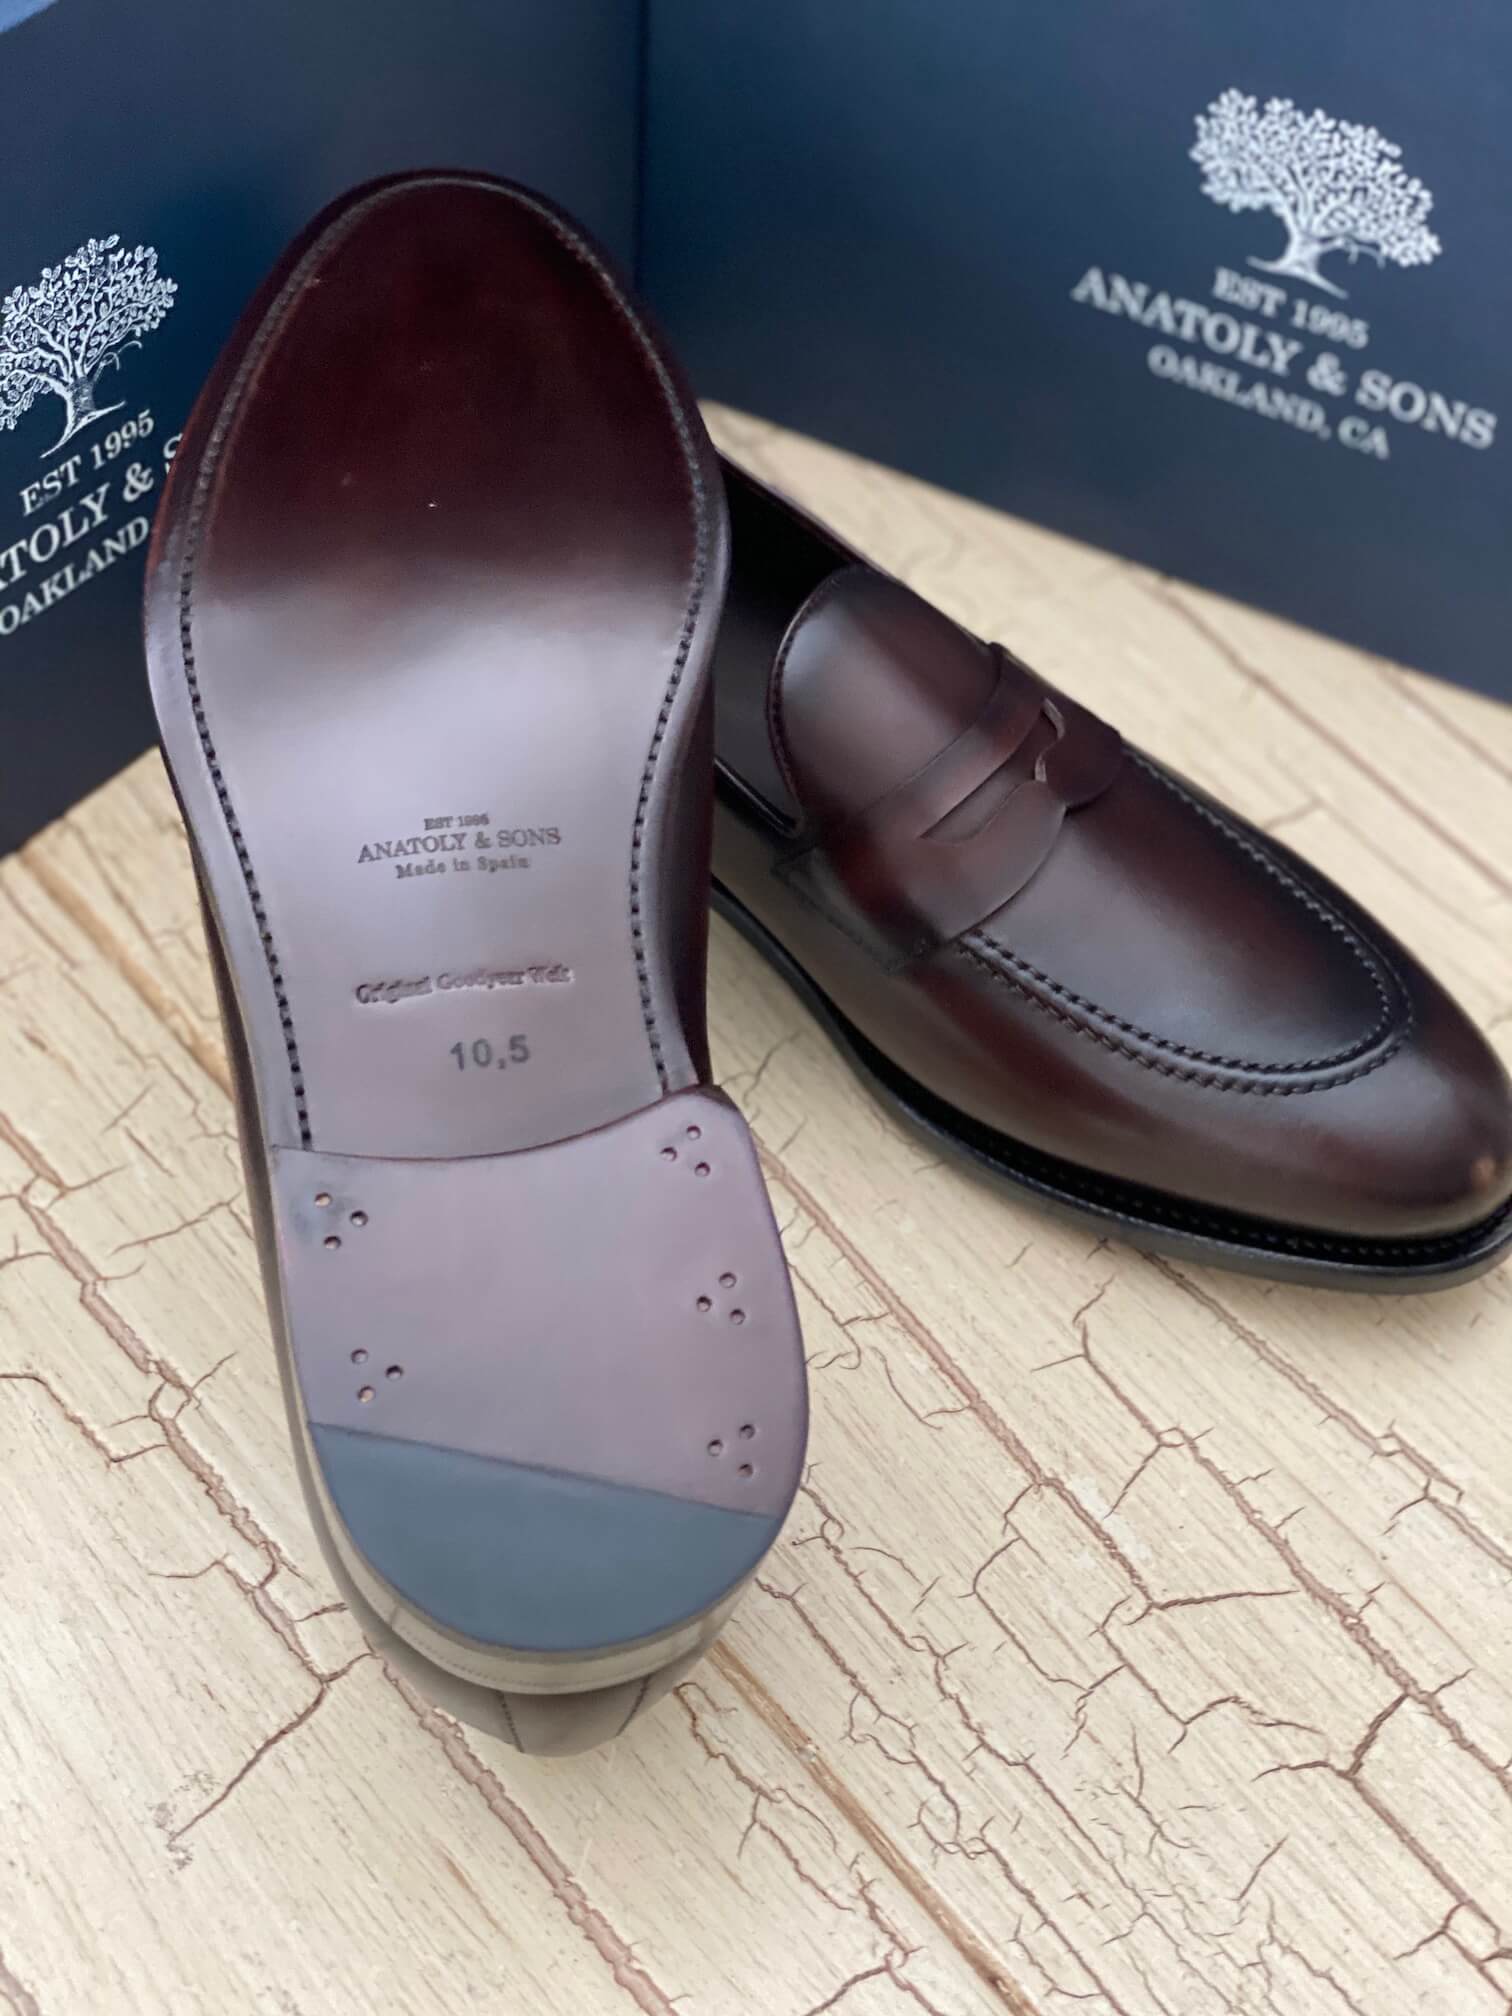 Anatoly & Sons blake stitched leather loafers